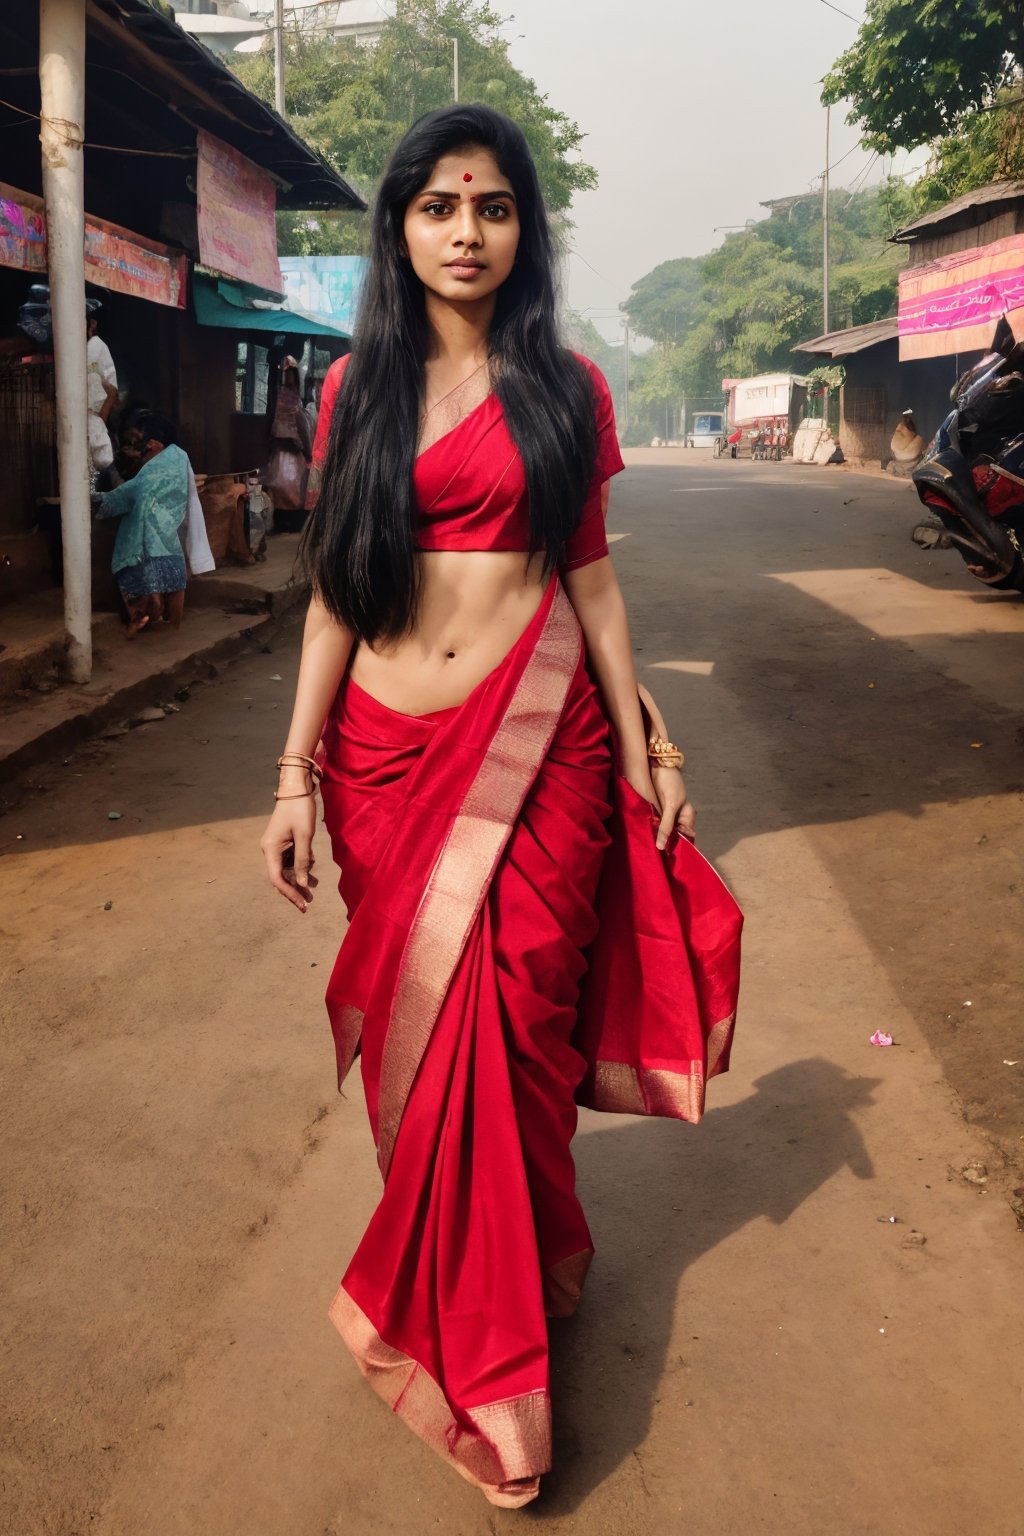 Taking and expected photo of mallu girl walking on a road BC peoples are working around the she is very urgent and she is going somewhere, Sony a7iii, photography of women crossing road very urgently, Raw photo of (25yo Kerala Beautiful young woman:1.1) (best quality, highres, ultra-detailed:1.2), vibrant colors, glowing dimond, glowing eyes, realistic Raw photo, realistic lighting, traditional Red saree,  exotic beauty, mesmerizing eyes, girl ,Thrissur